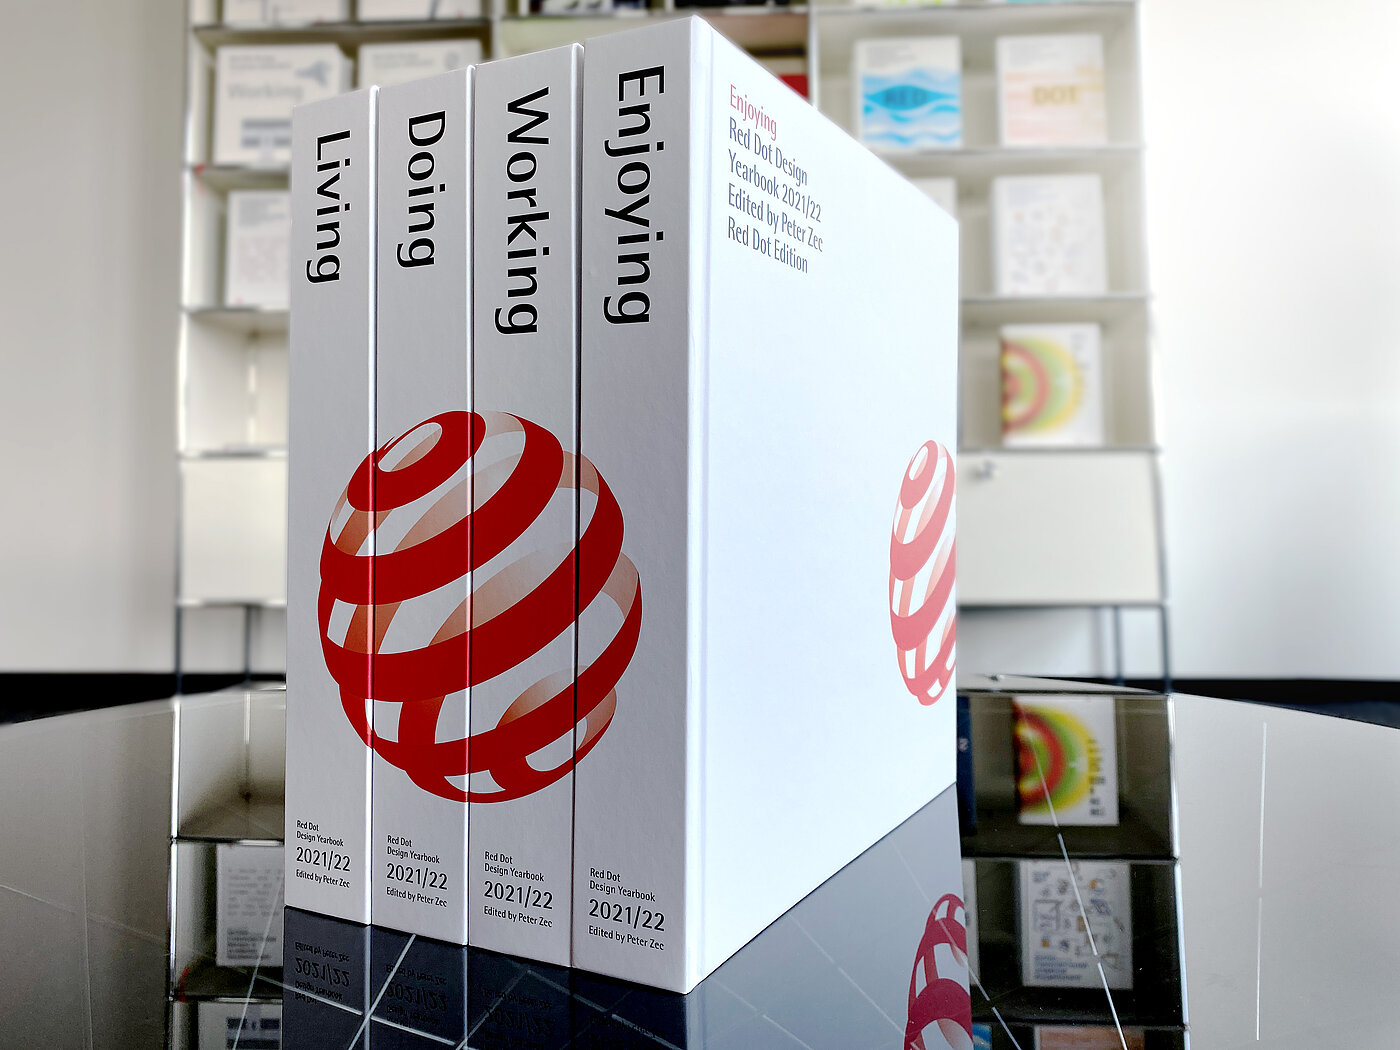 All four volumes of the Red Dot Design Yearbook 2021/22